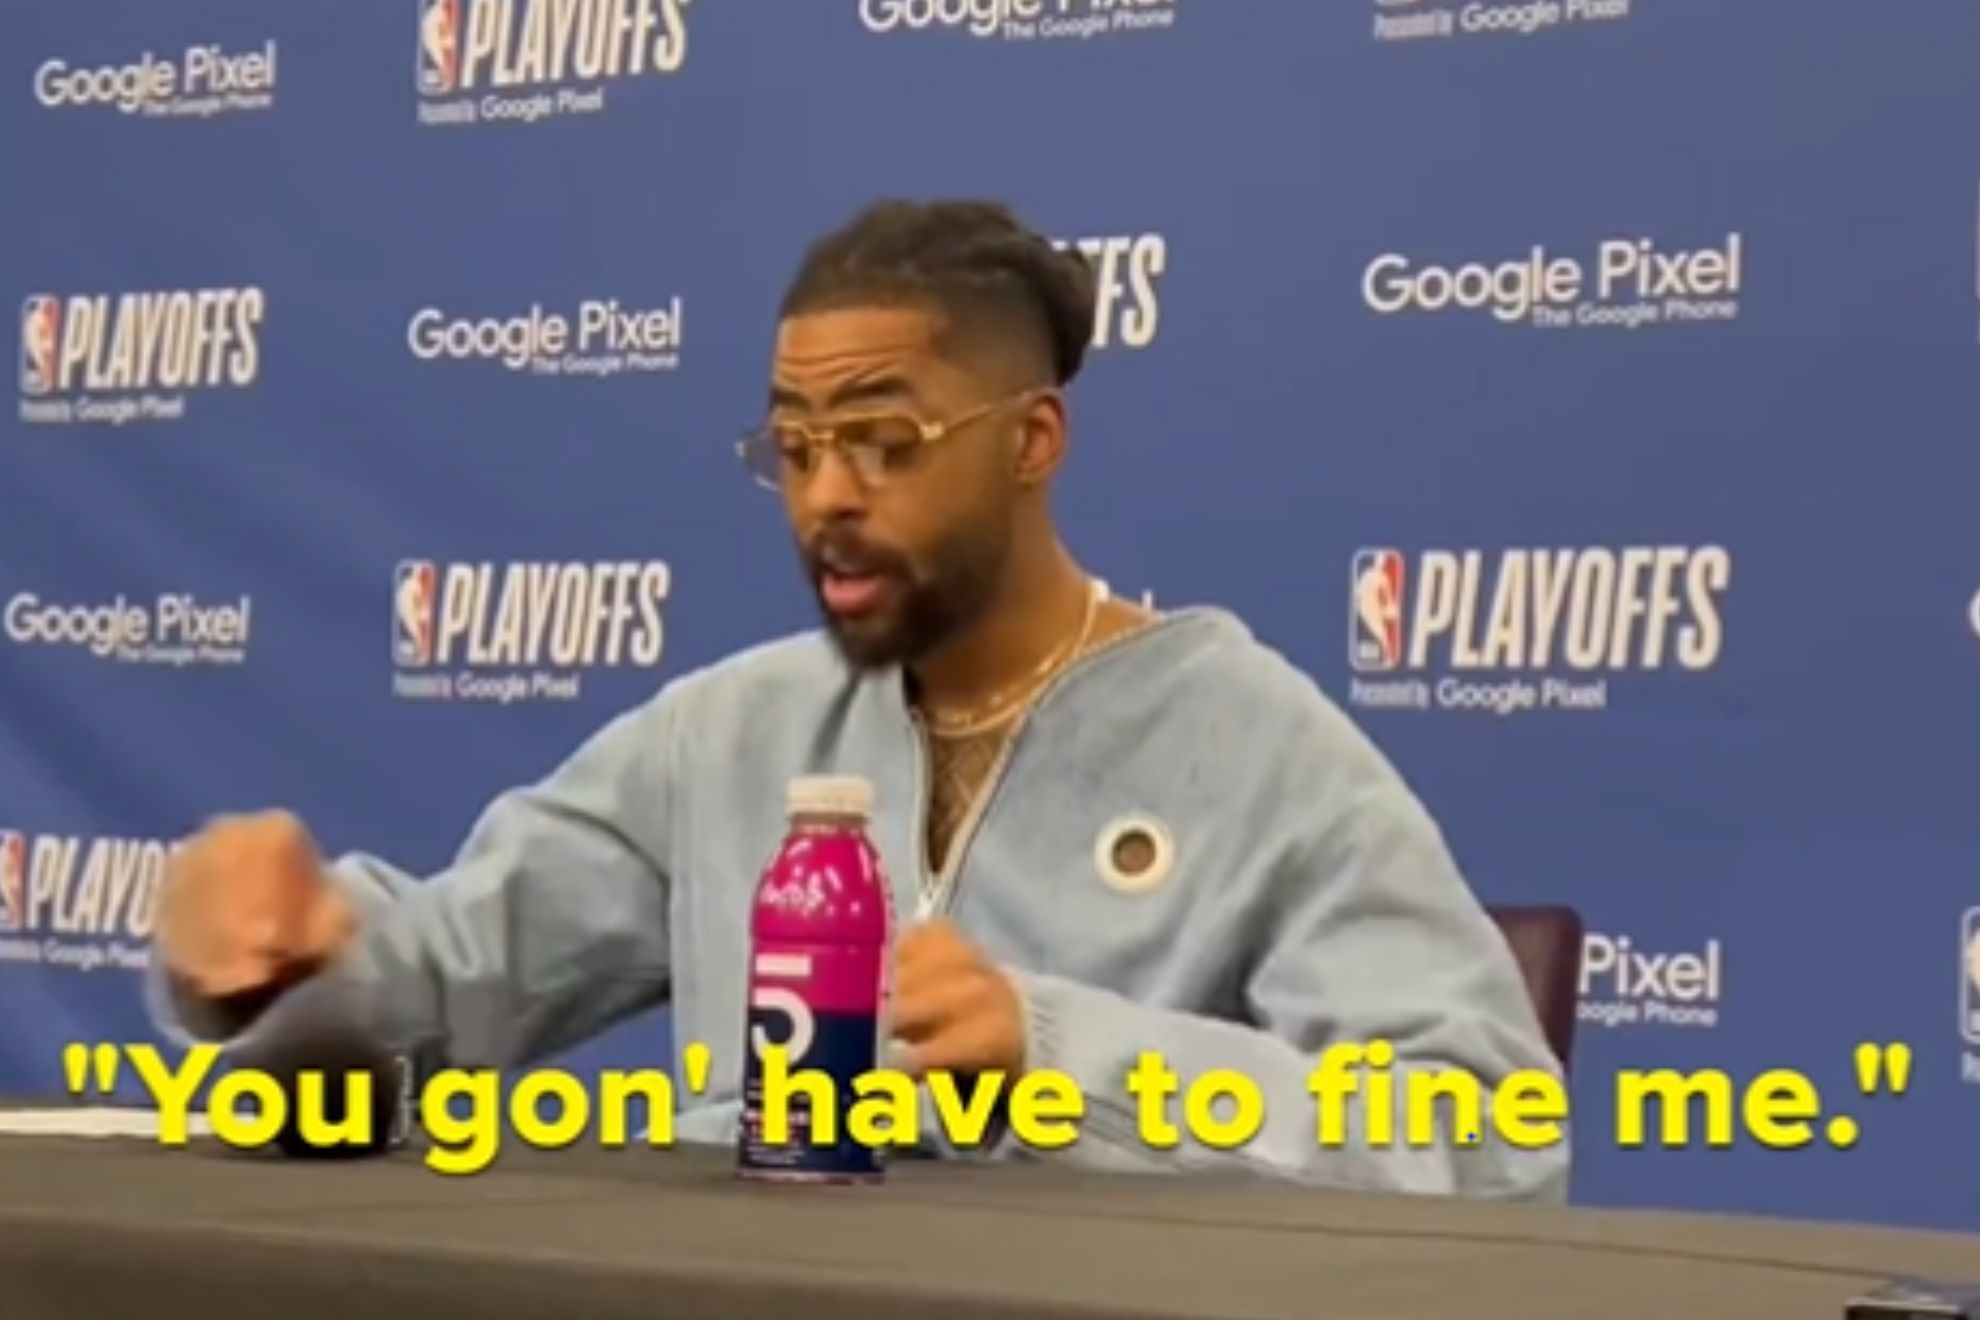 D'Angelo Russell inadvertently creates genius marketing campaign for NBA rival